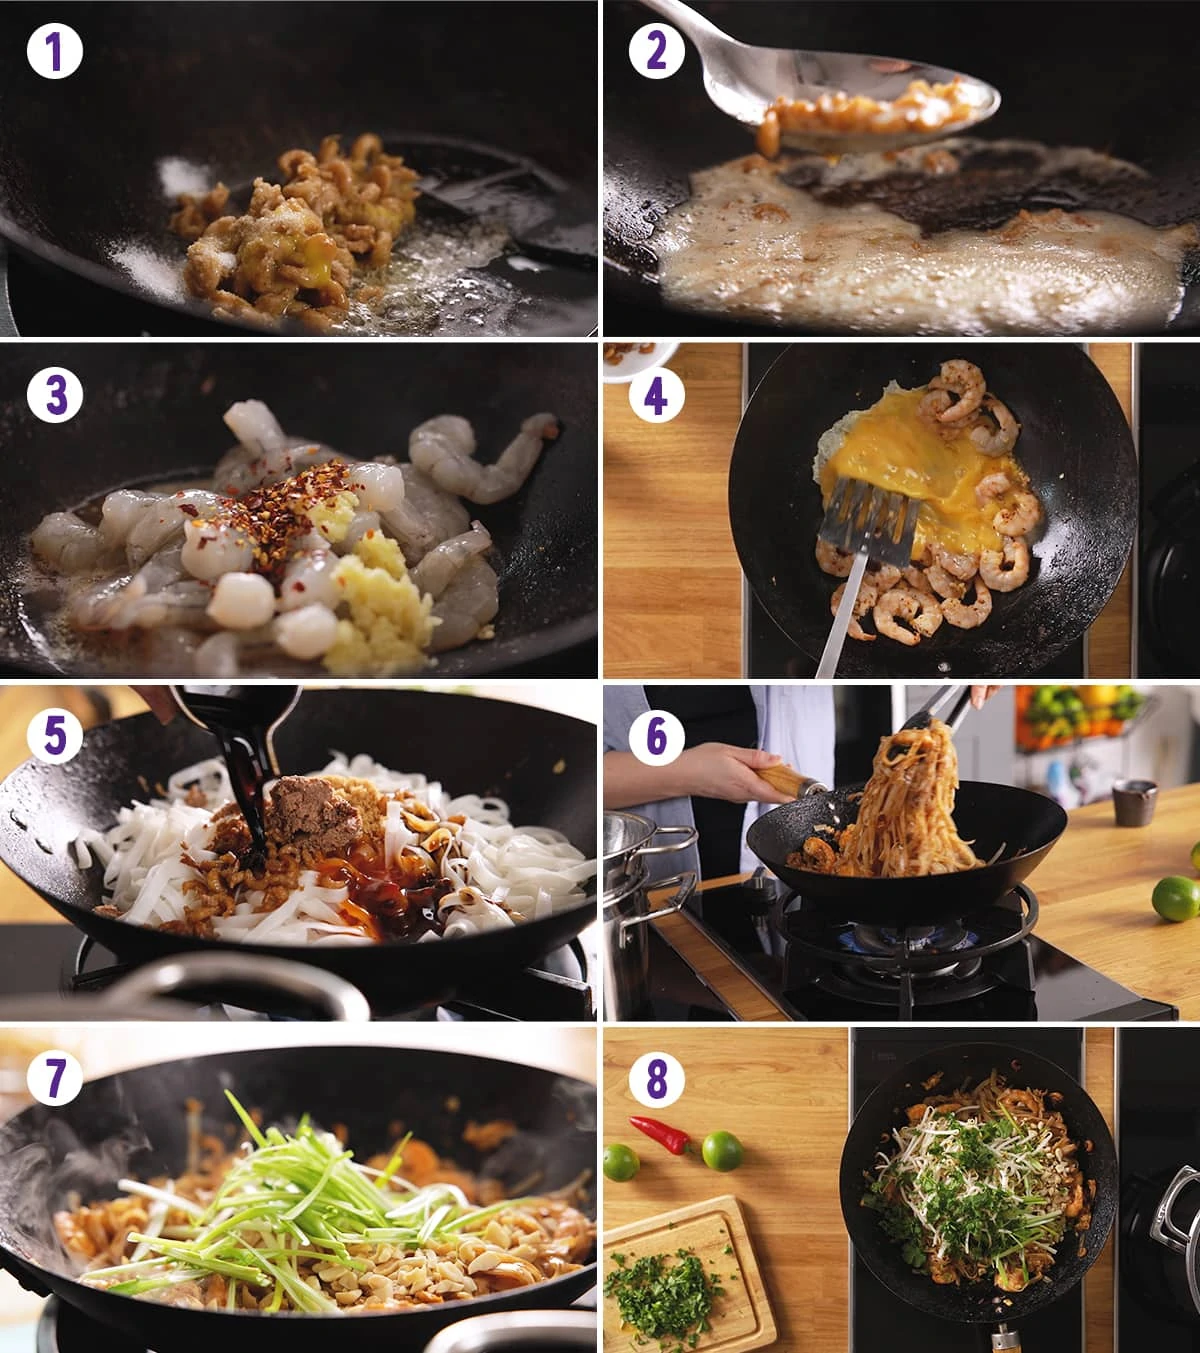 8 image collage showing how to make Pad Thai